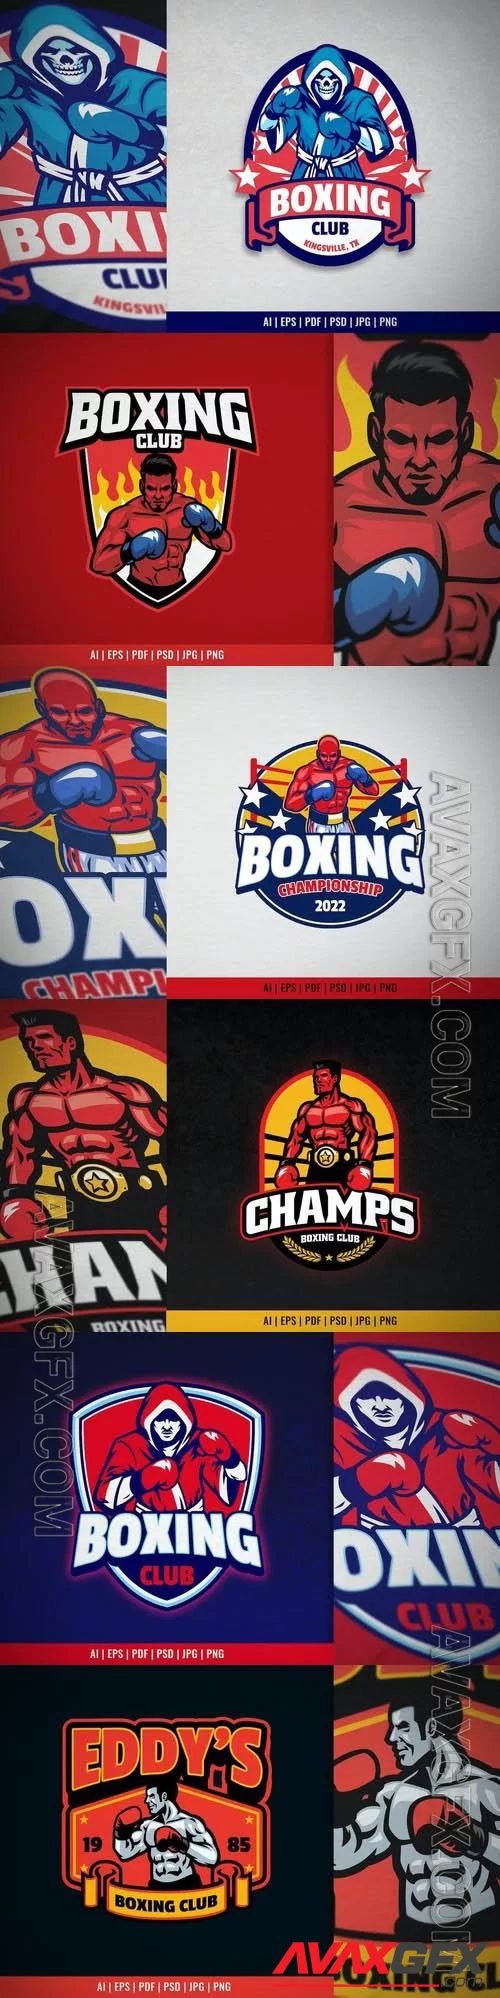 Boxer Mascot for Boxing Club Logo in Vintage